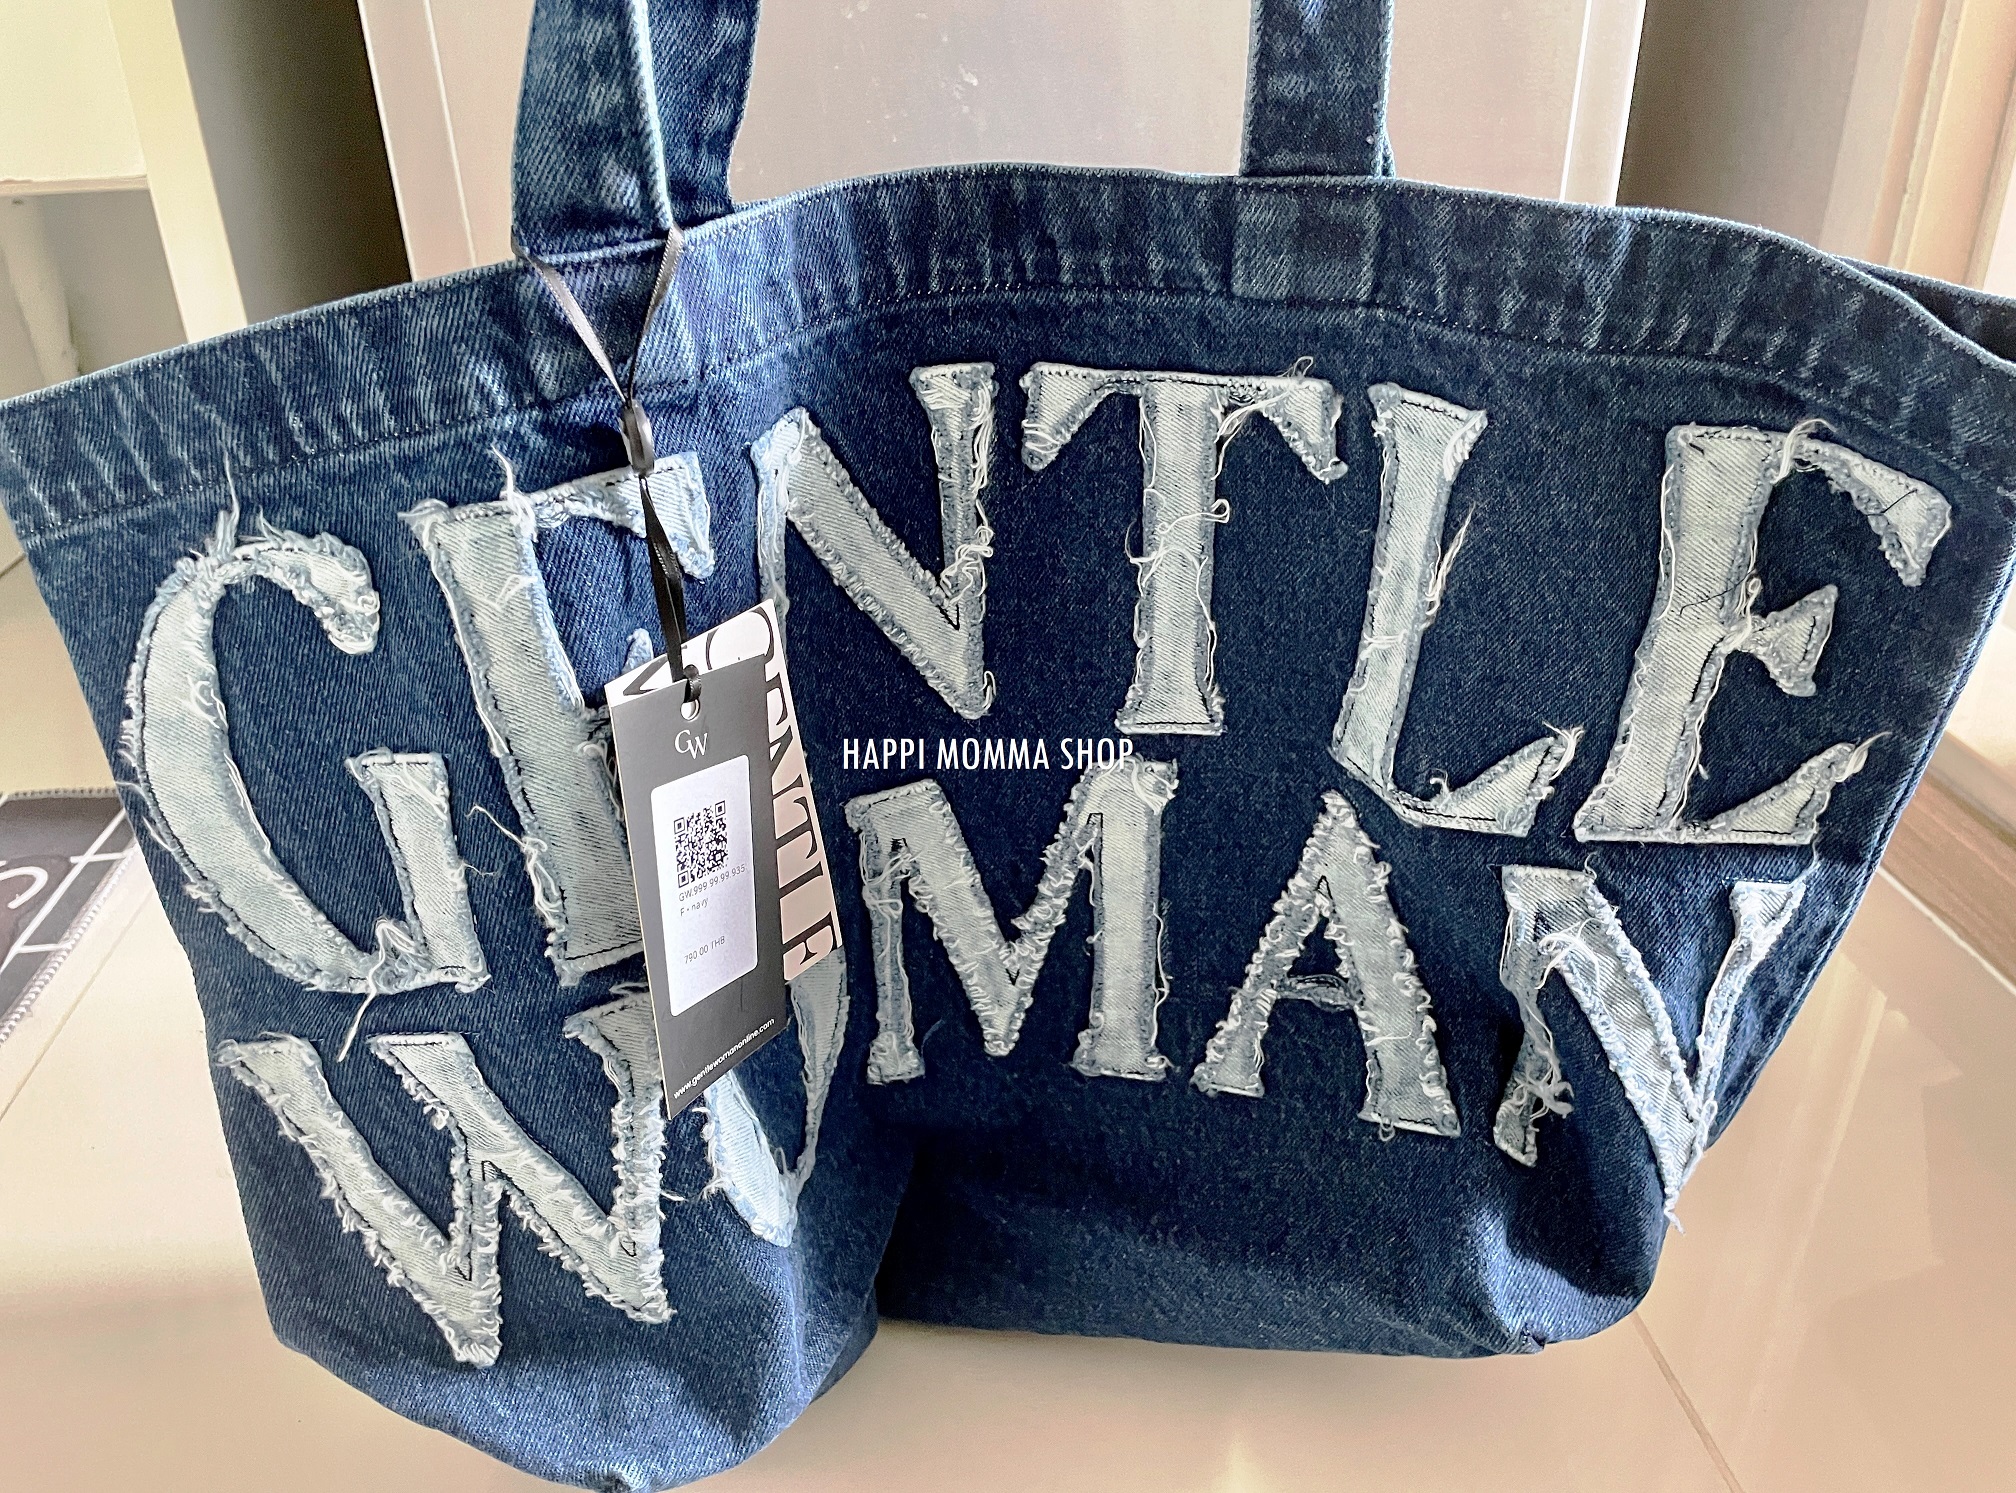 Gentlewoman Denim Tote Bag for 1800. Onhand. Available for same day delivery  via lalamove. Pick up hours 10am-5pm